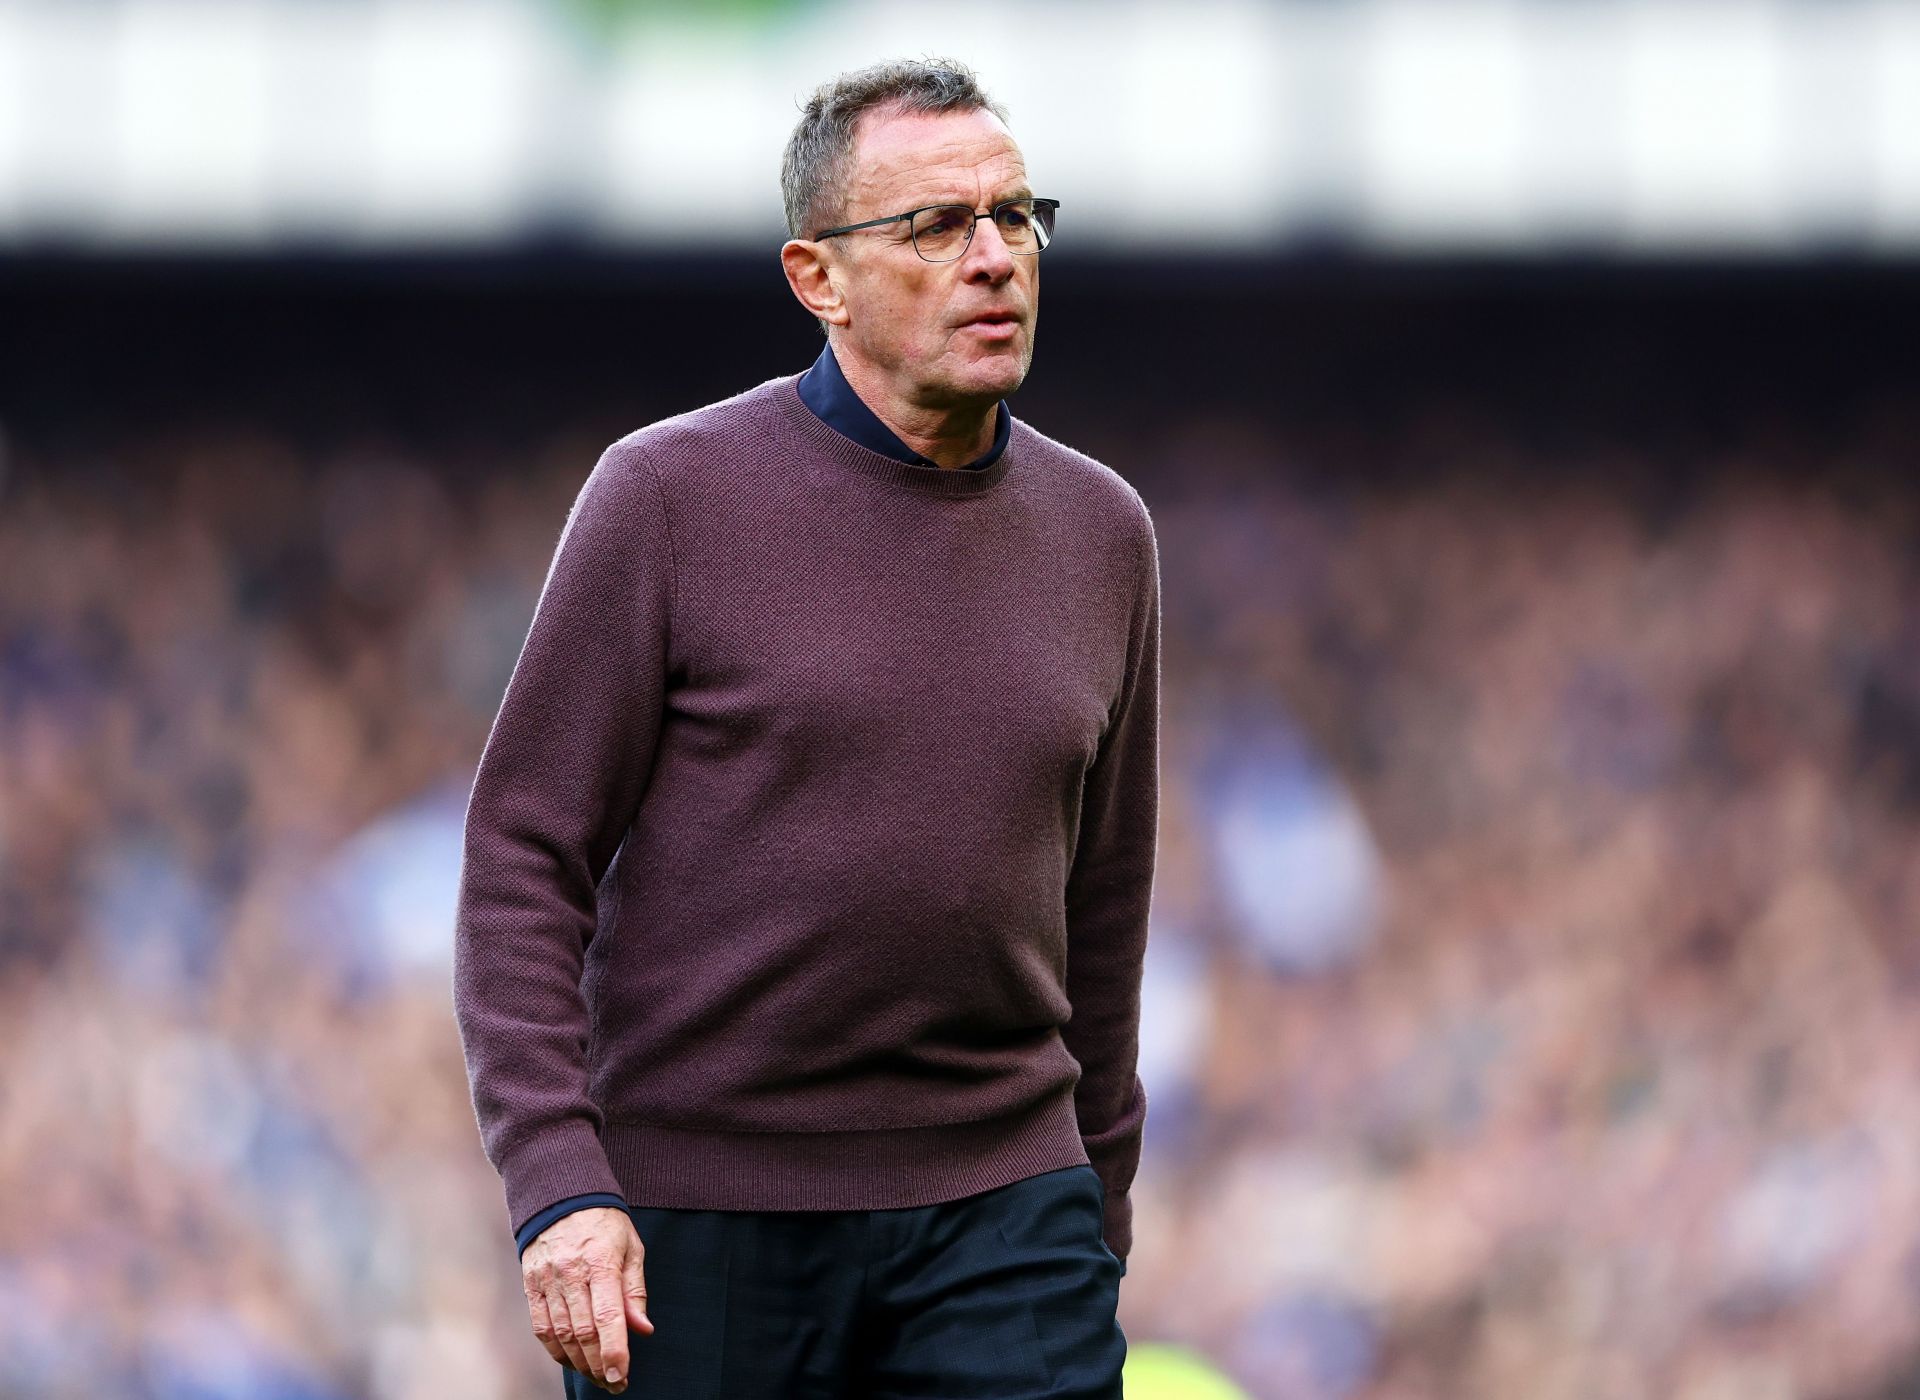 Ralf Rangnick during an Everton v Manchester United match (File)